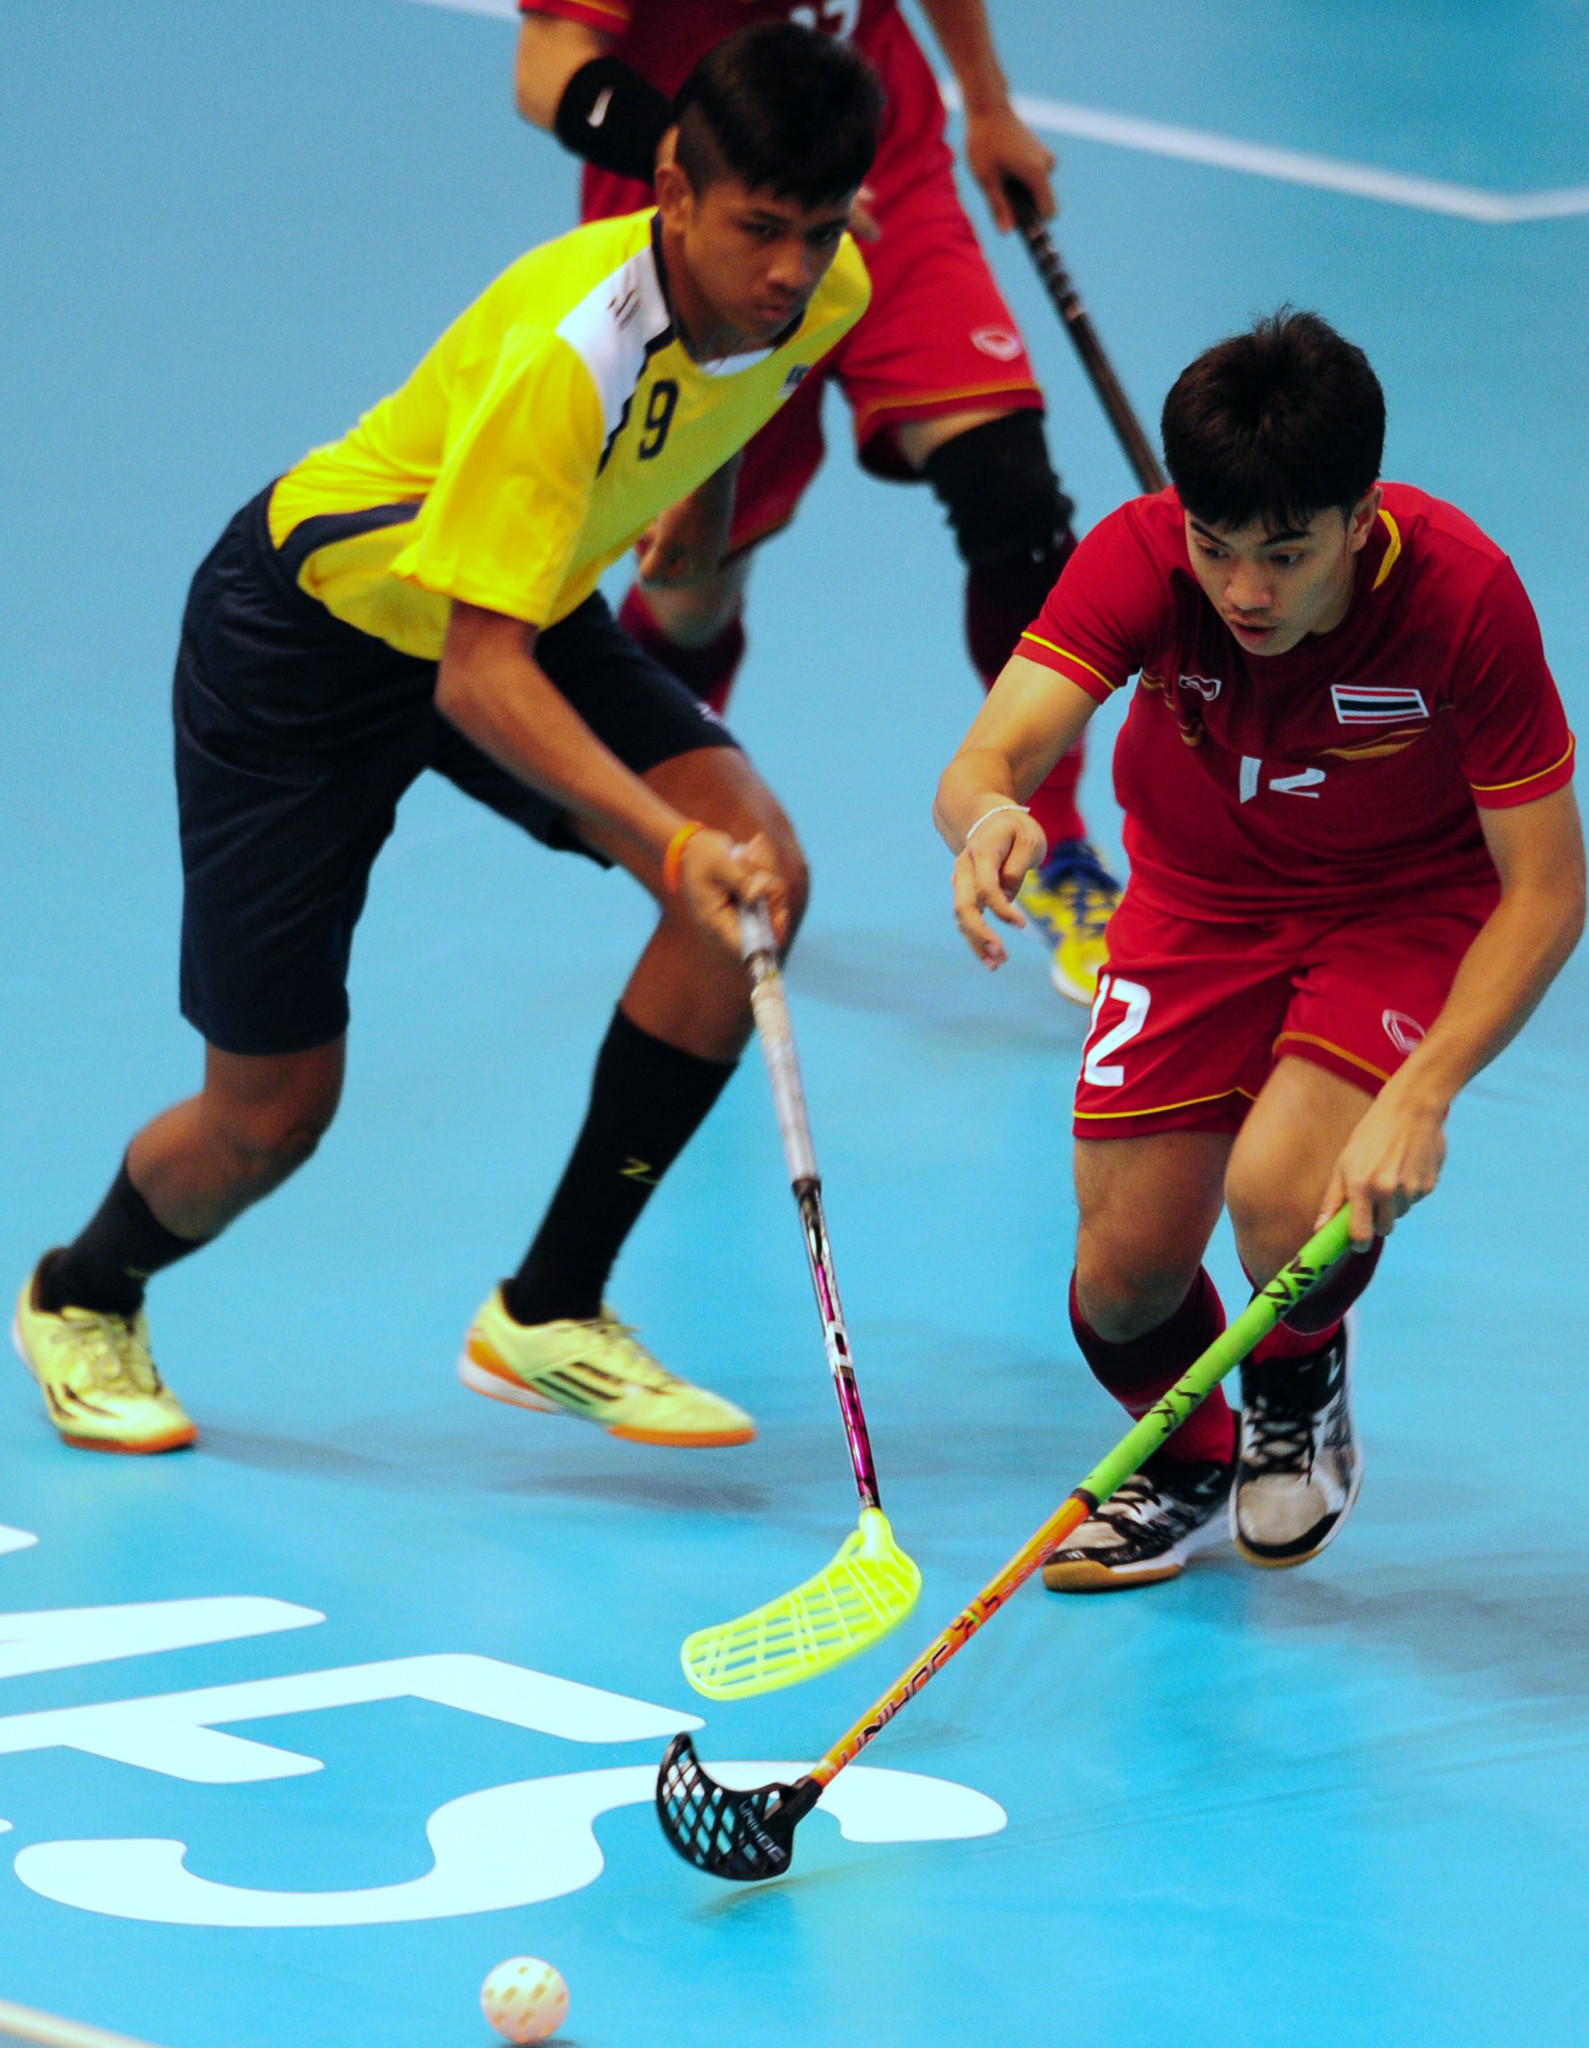 The floorball event in Thailand is currently still going ahead ©Getty Images